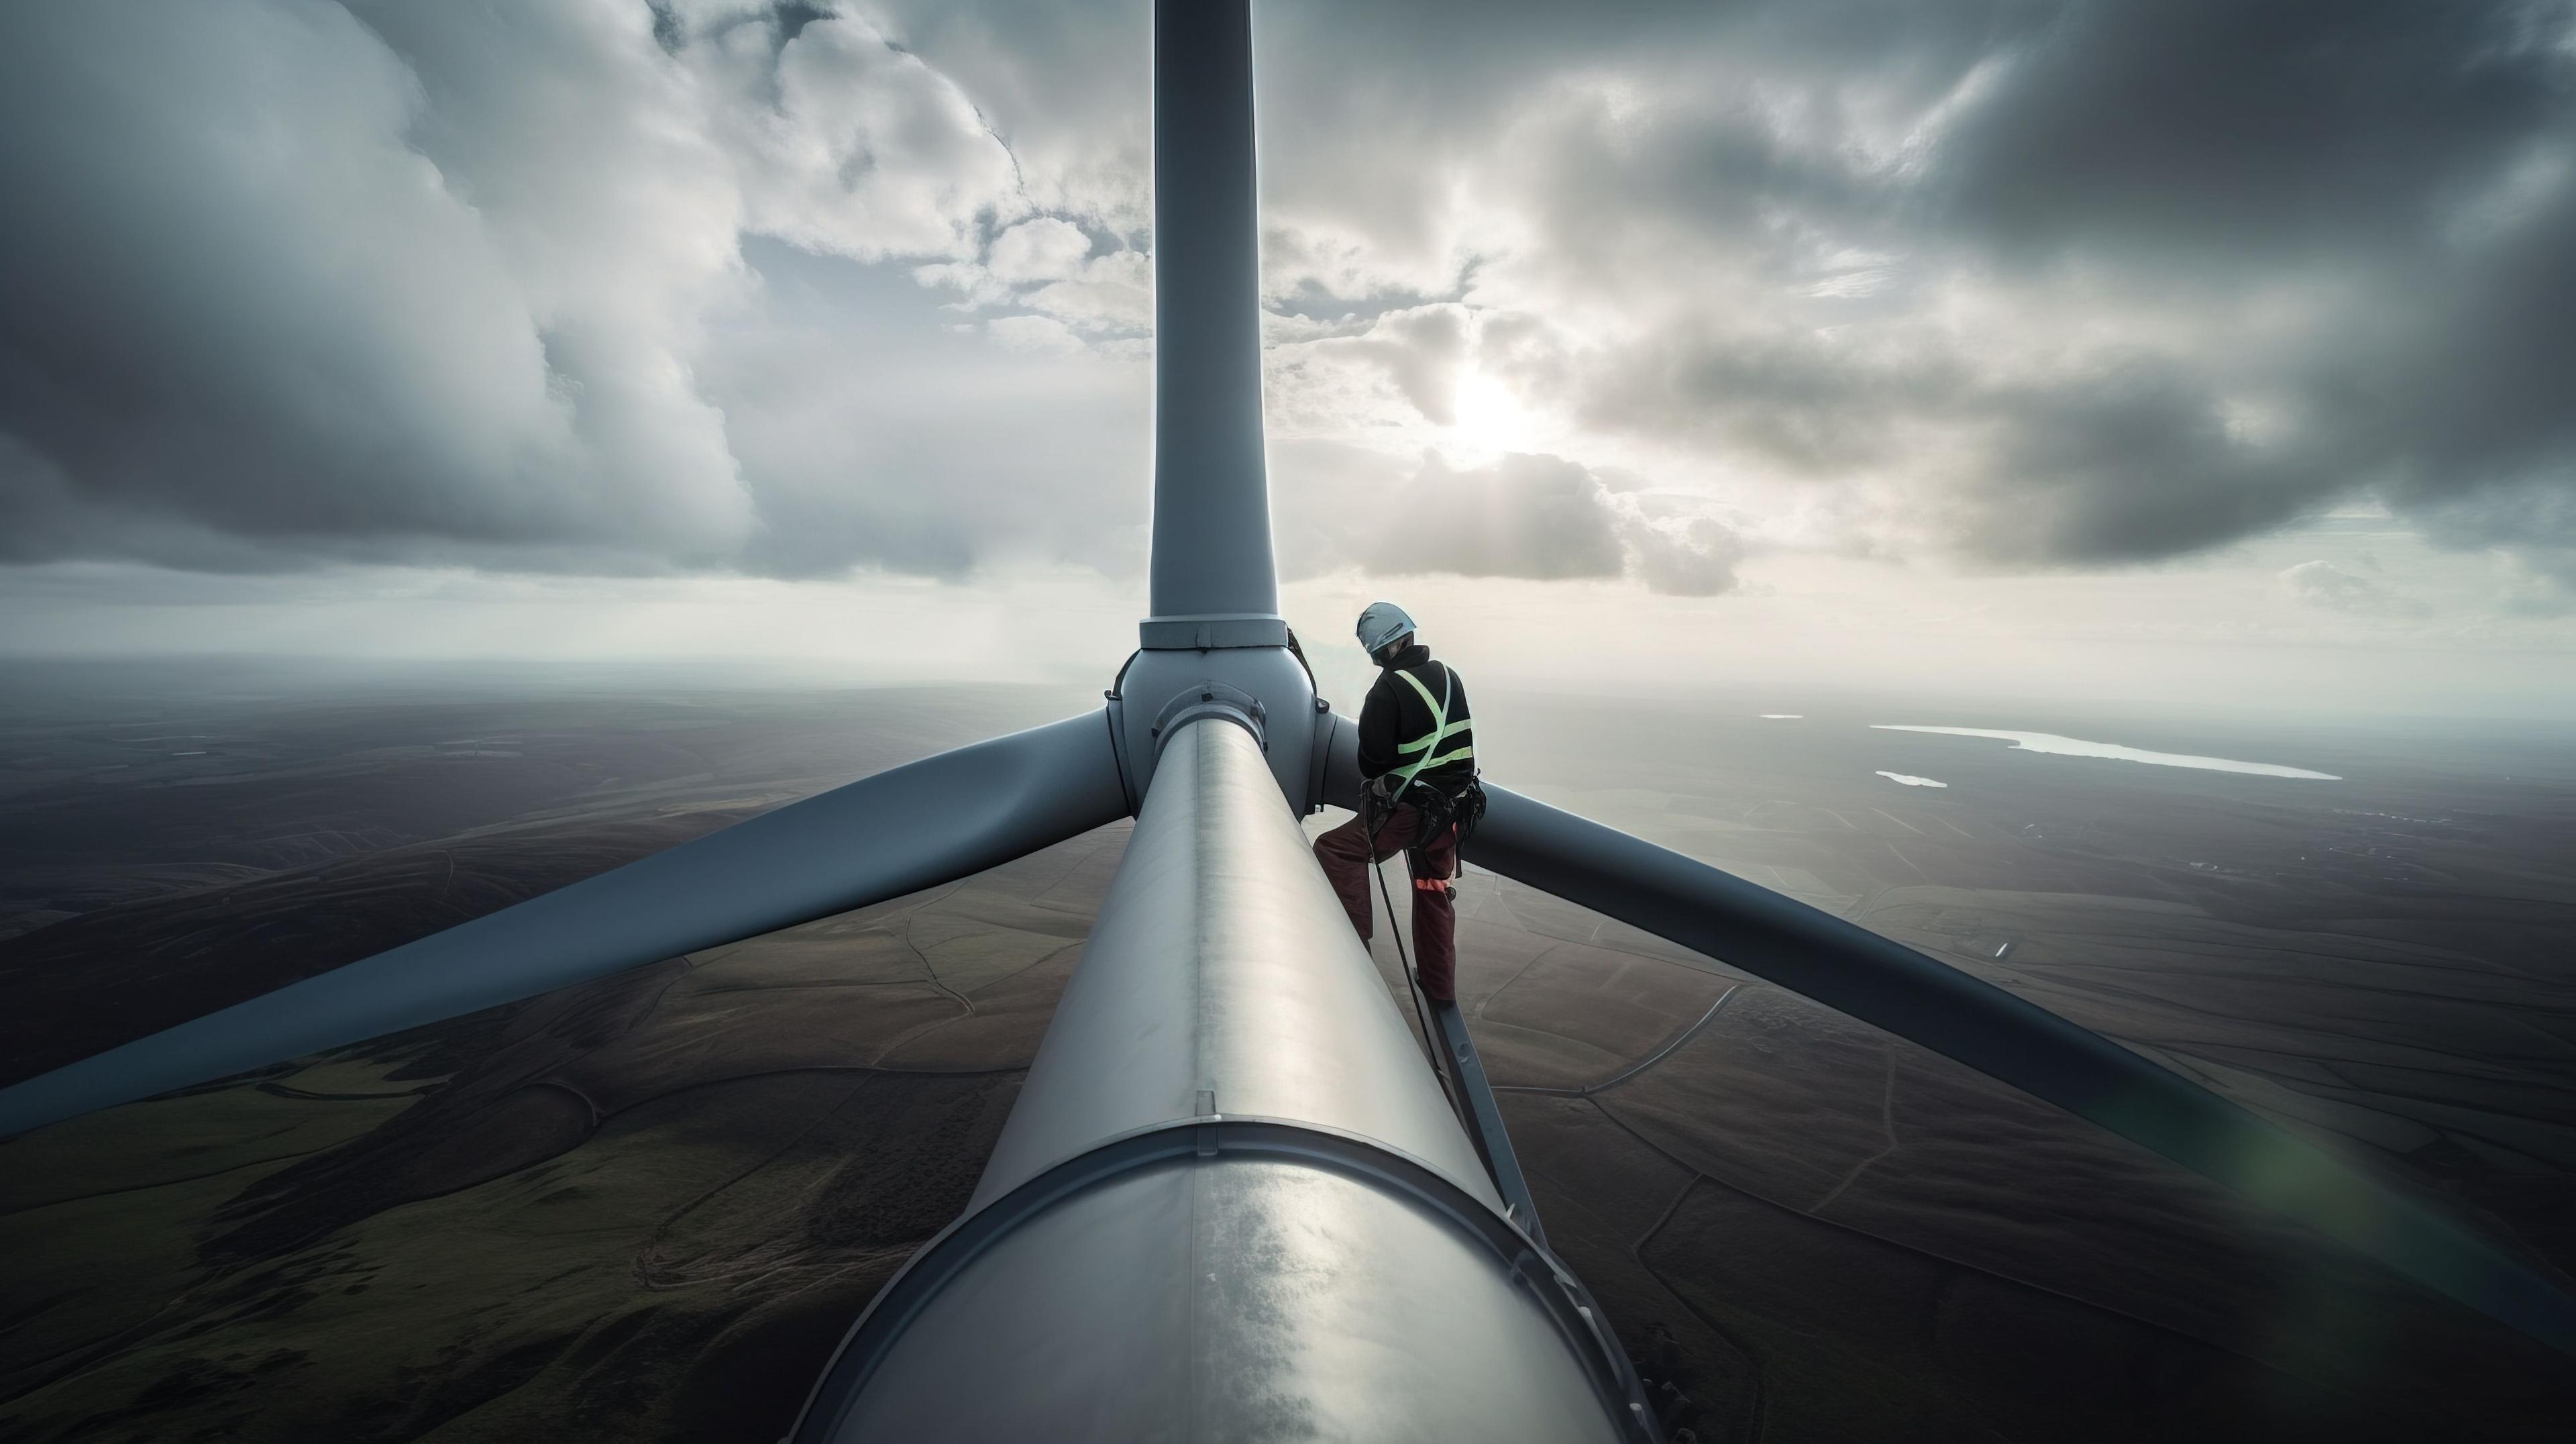 A worker standing at the top of a wind turbine